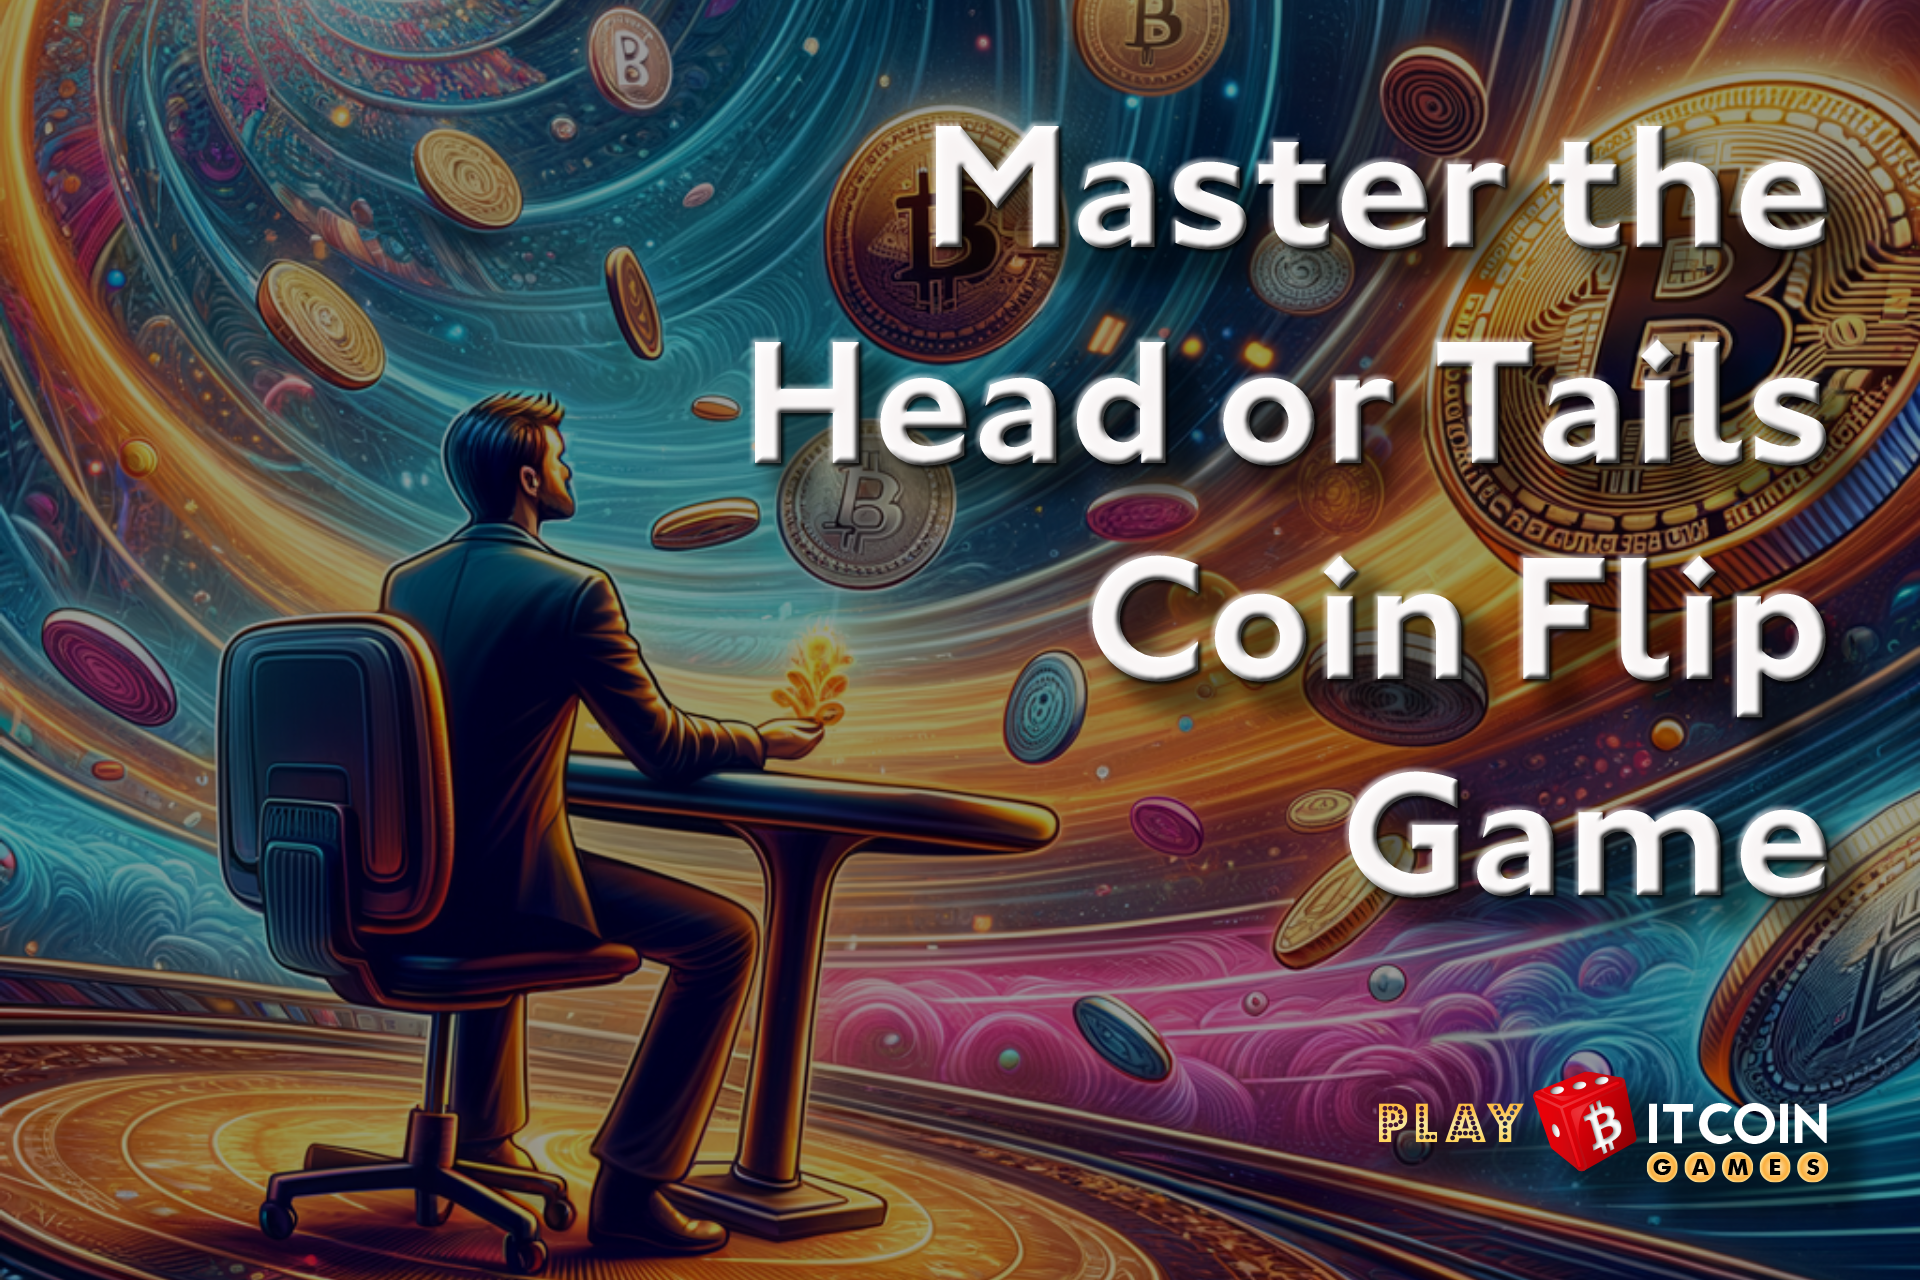 Master the Head or Tails Coin Flip Game with These 10 Mind Blowing Tricks